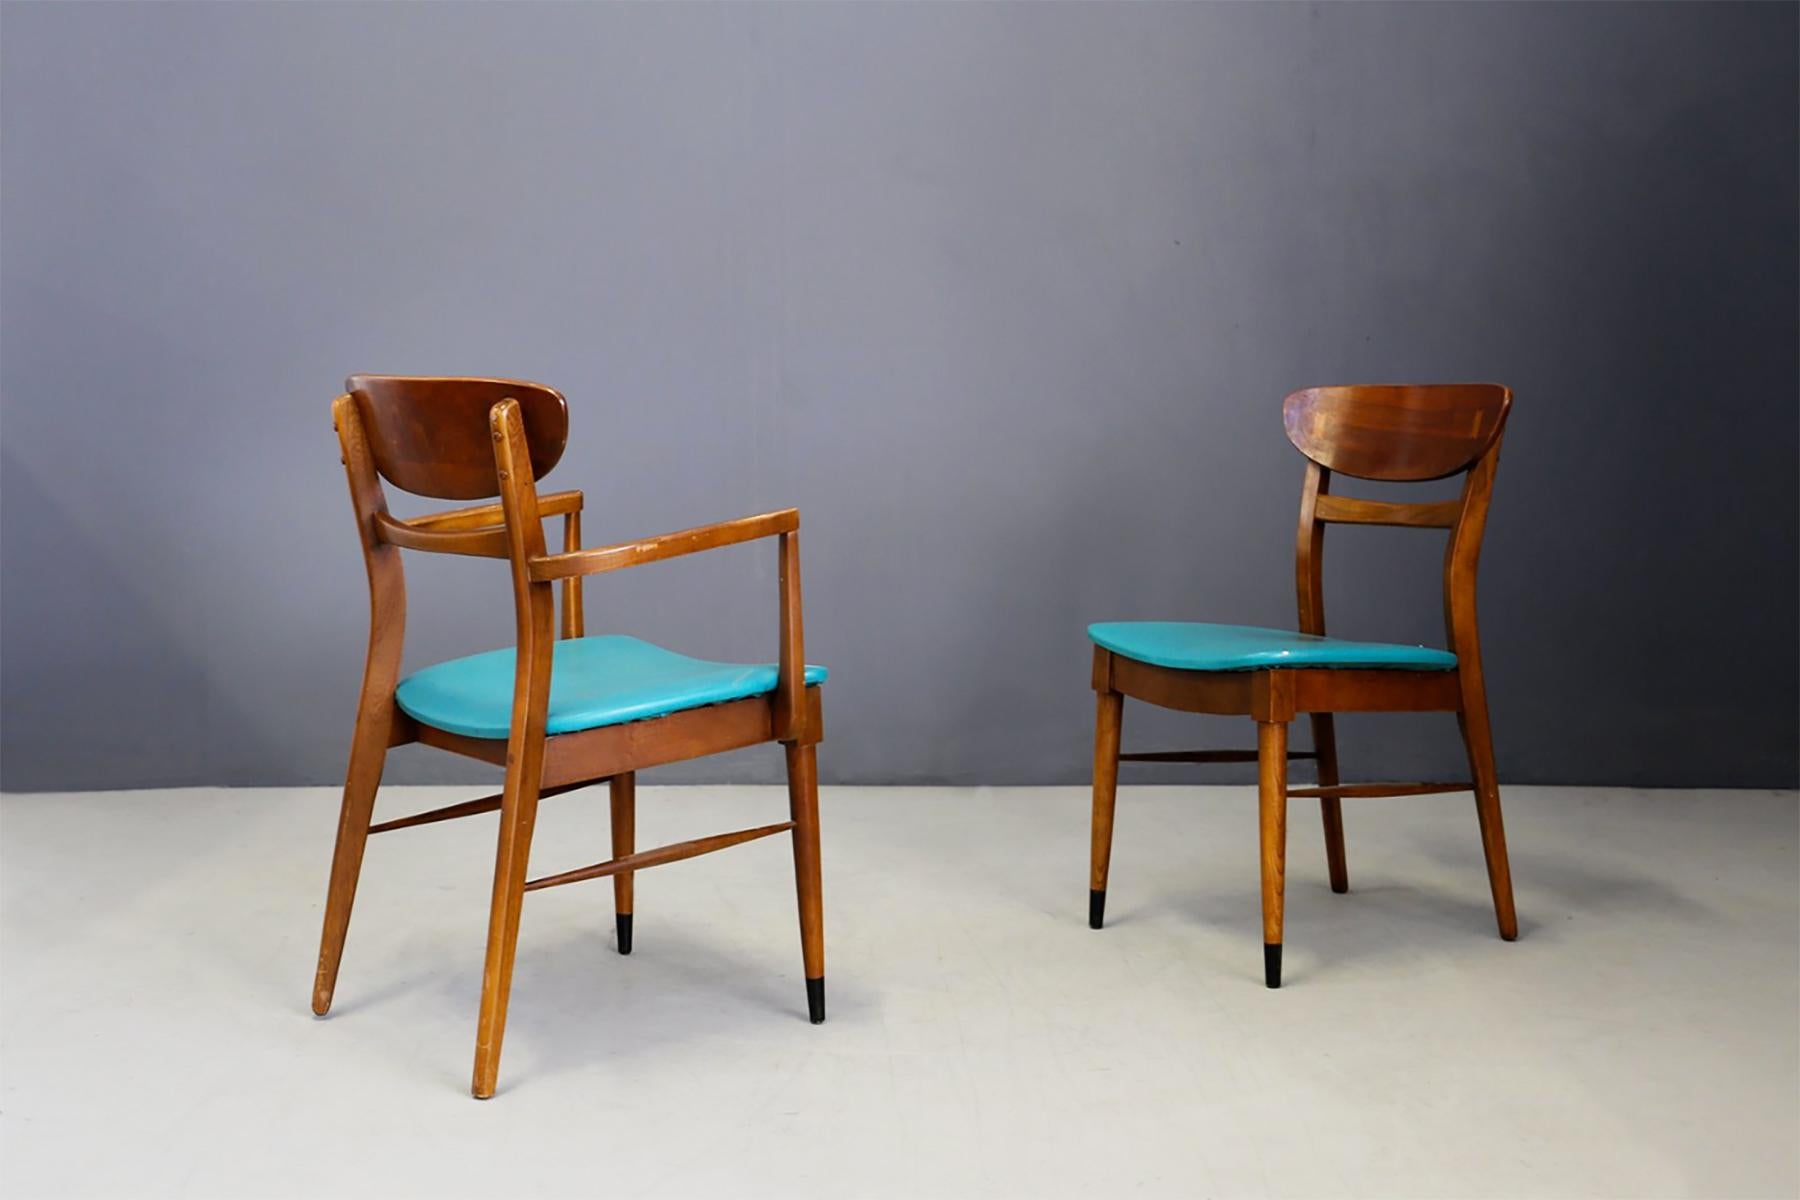 Beautiful American set composed of four chairs in wood and leather.
American chairs set includes two table head chairs with arms and two chairs for diners without arms. 
The seats of the American chairs were made of leather in yellow and turquoise